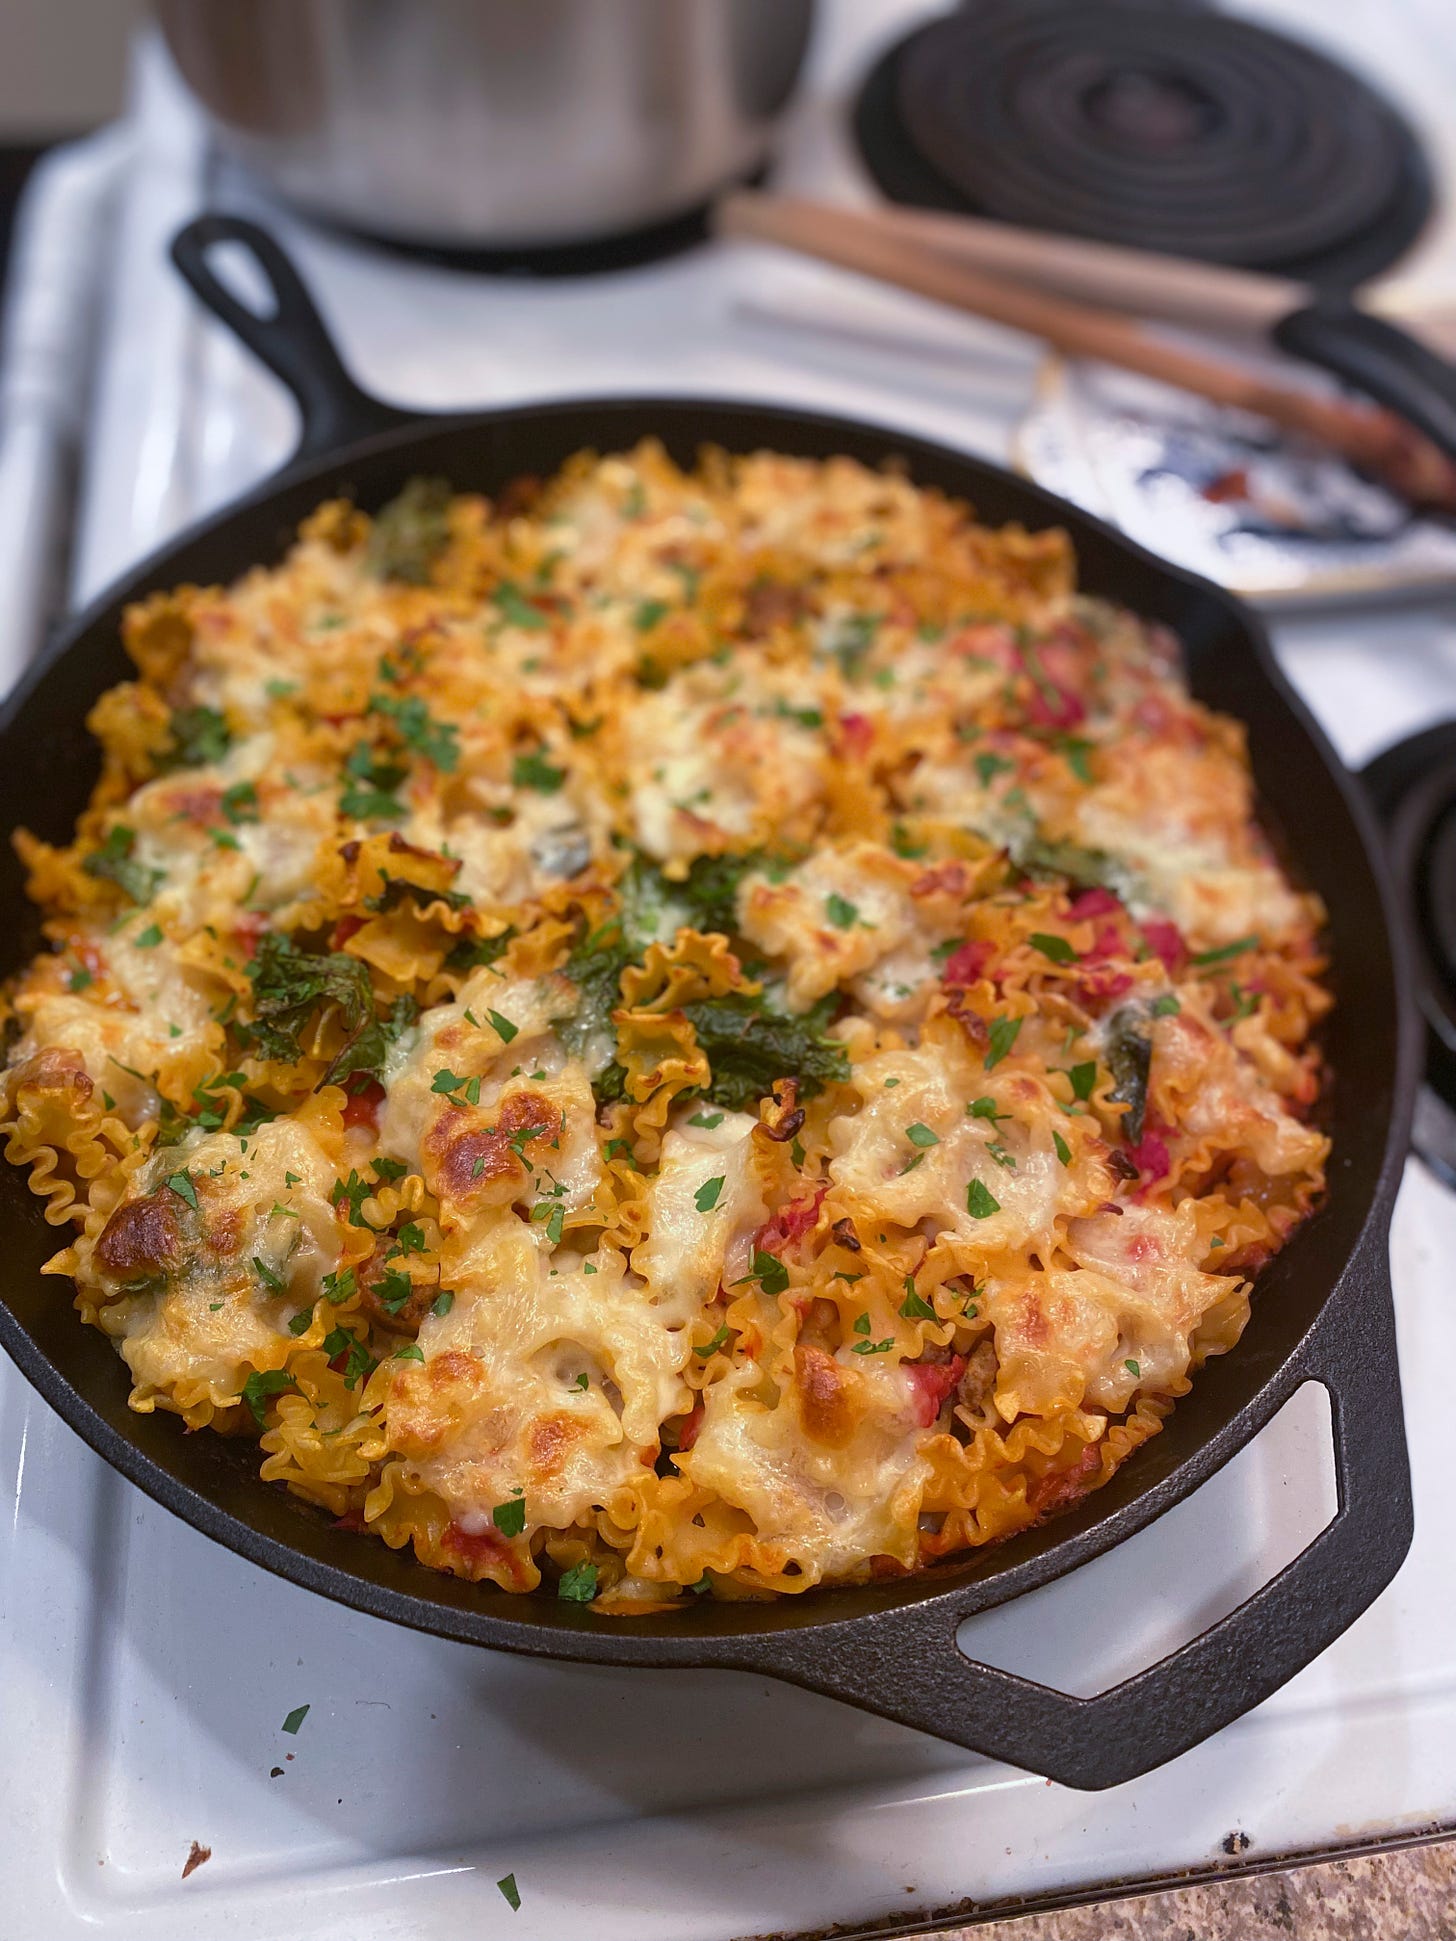 A large cast iron pan filled to the brim with baked pasta in a light tomato sauce with kale and basil, topped with patches of mozzarella and dusted with parsley.